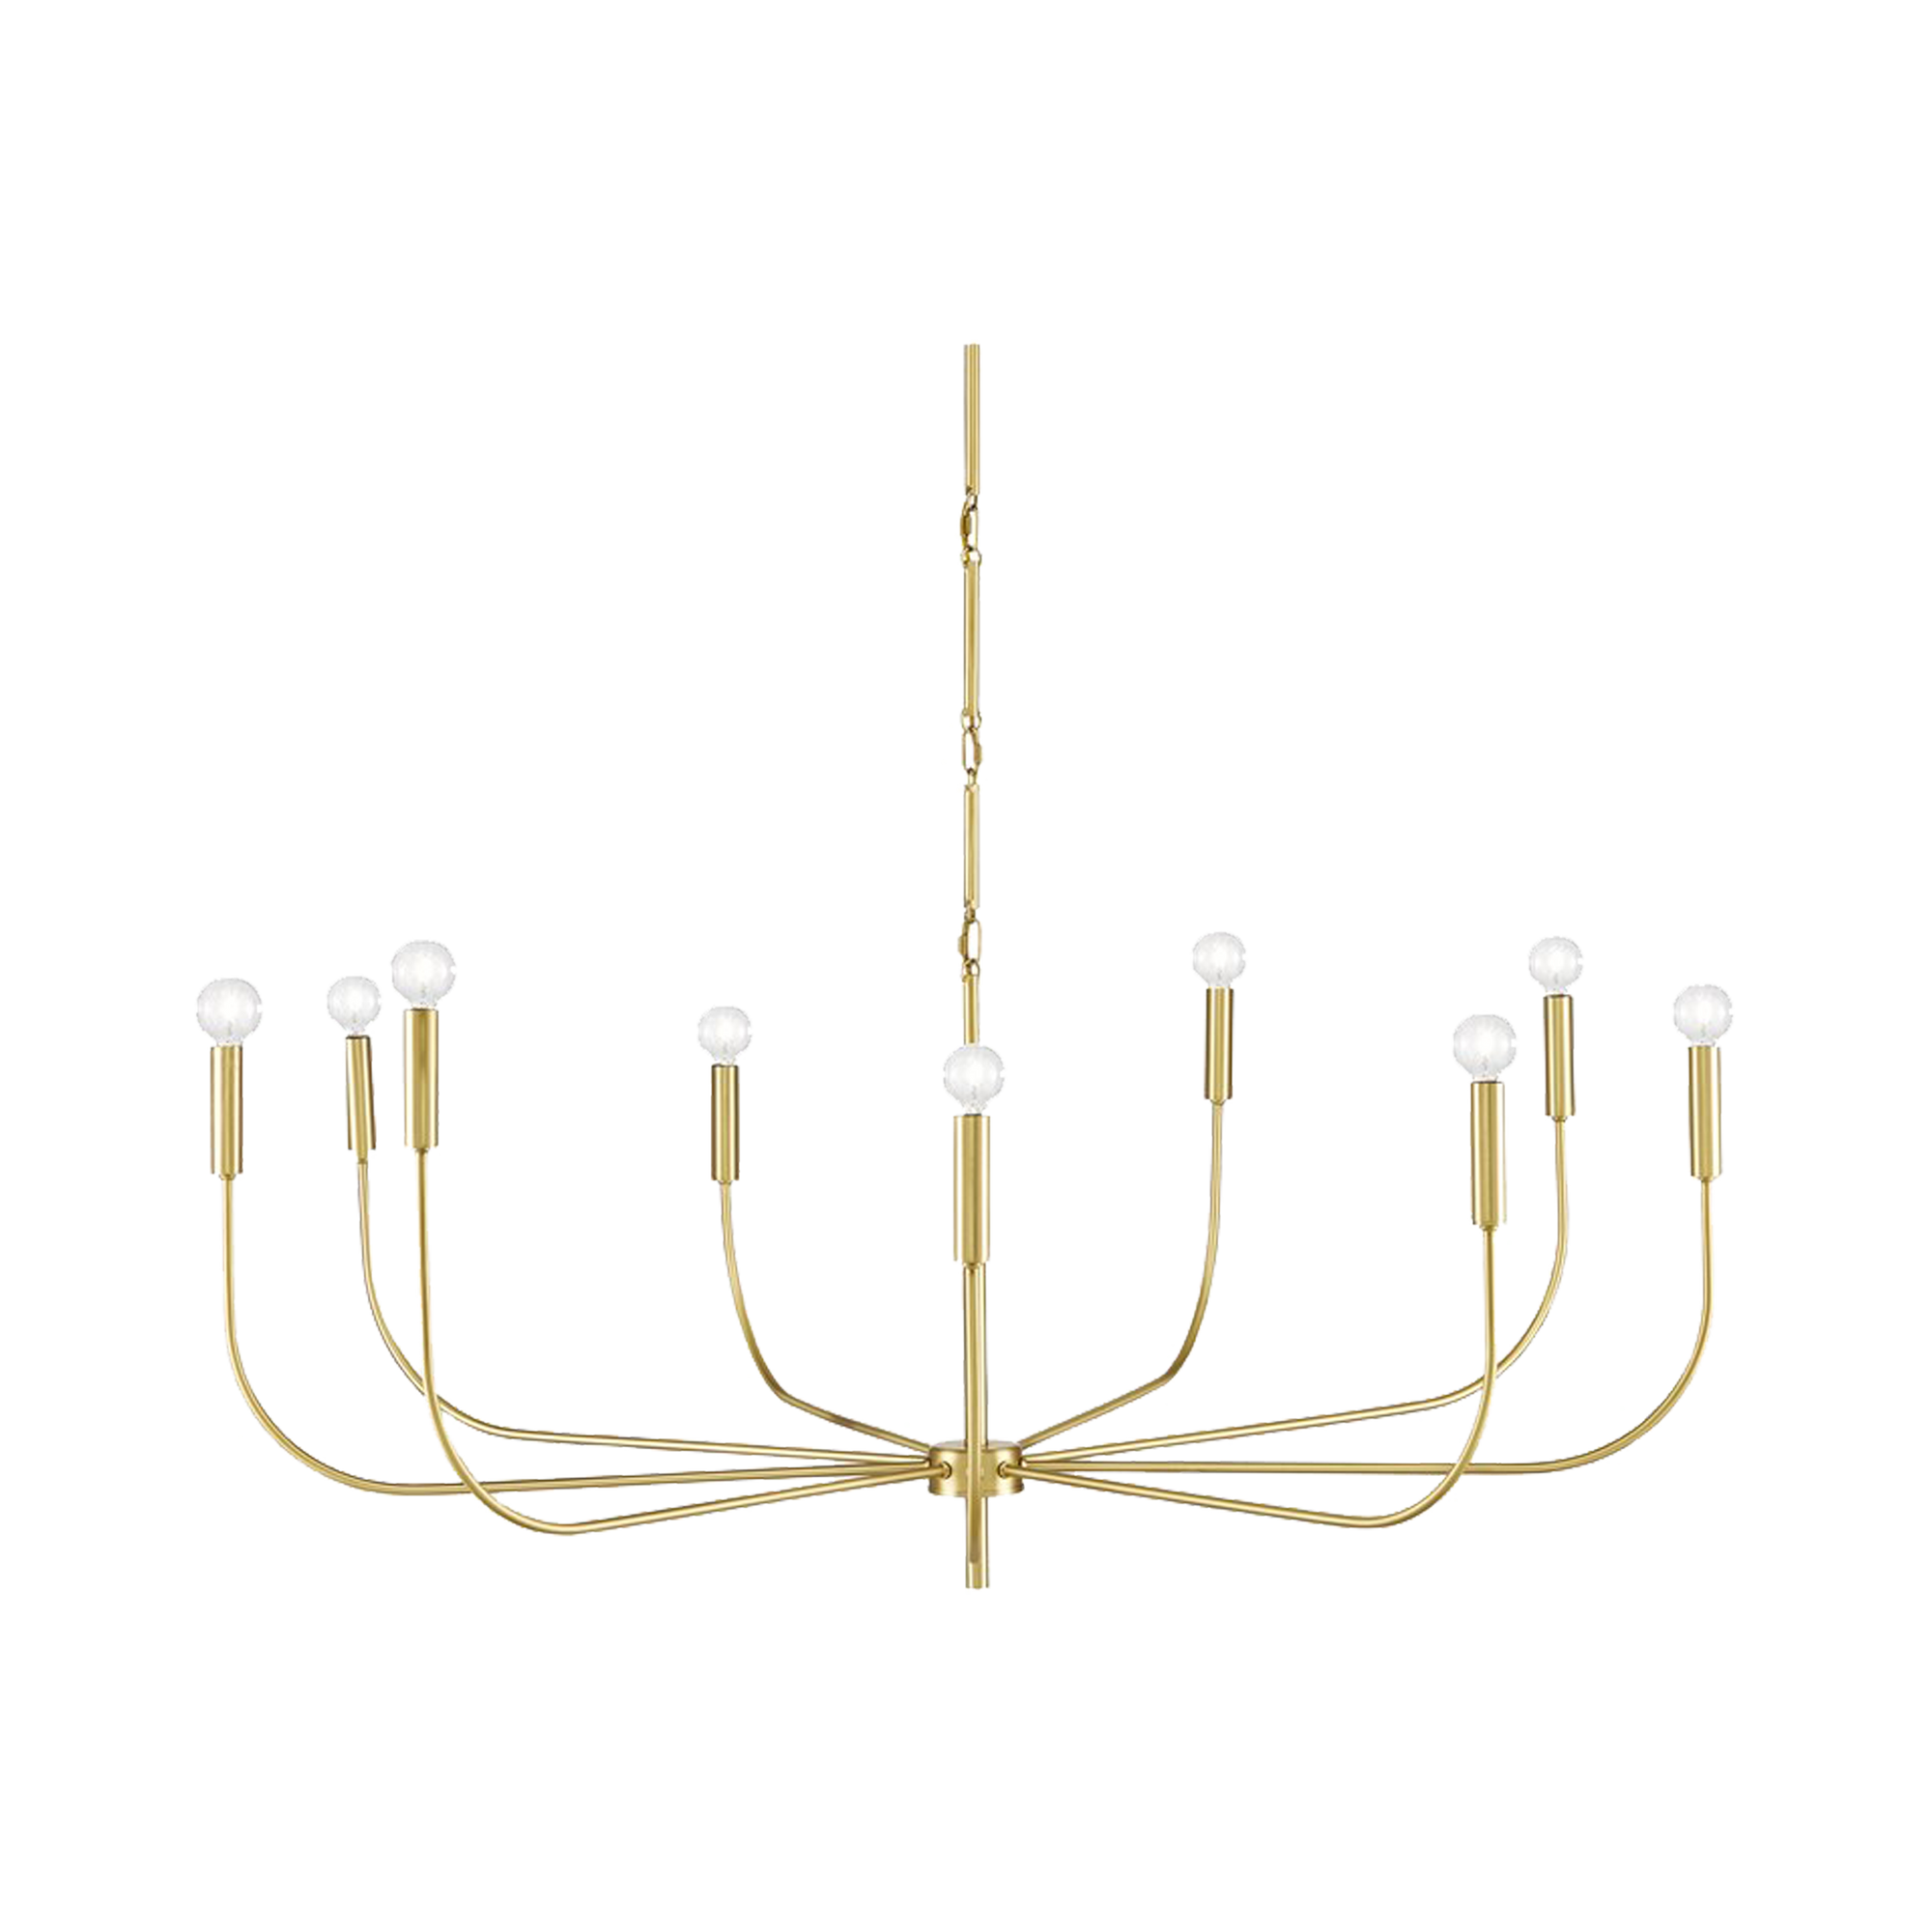 The Lepanto Chandelier fans out and reaches toward the ceiling to lift is pared-down bobeches that clasp its bulbs.